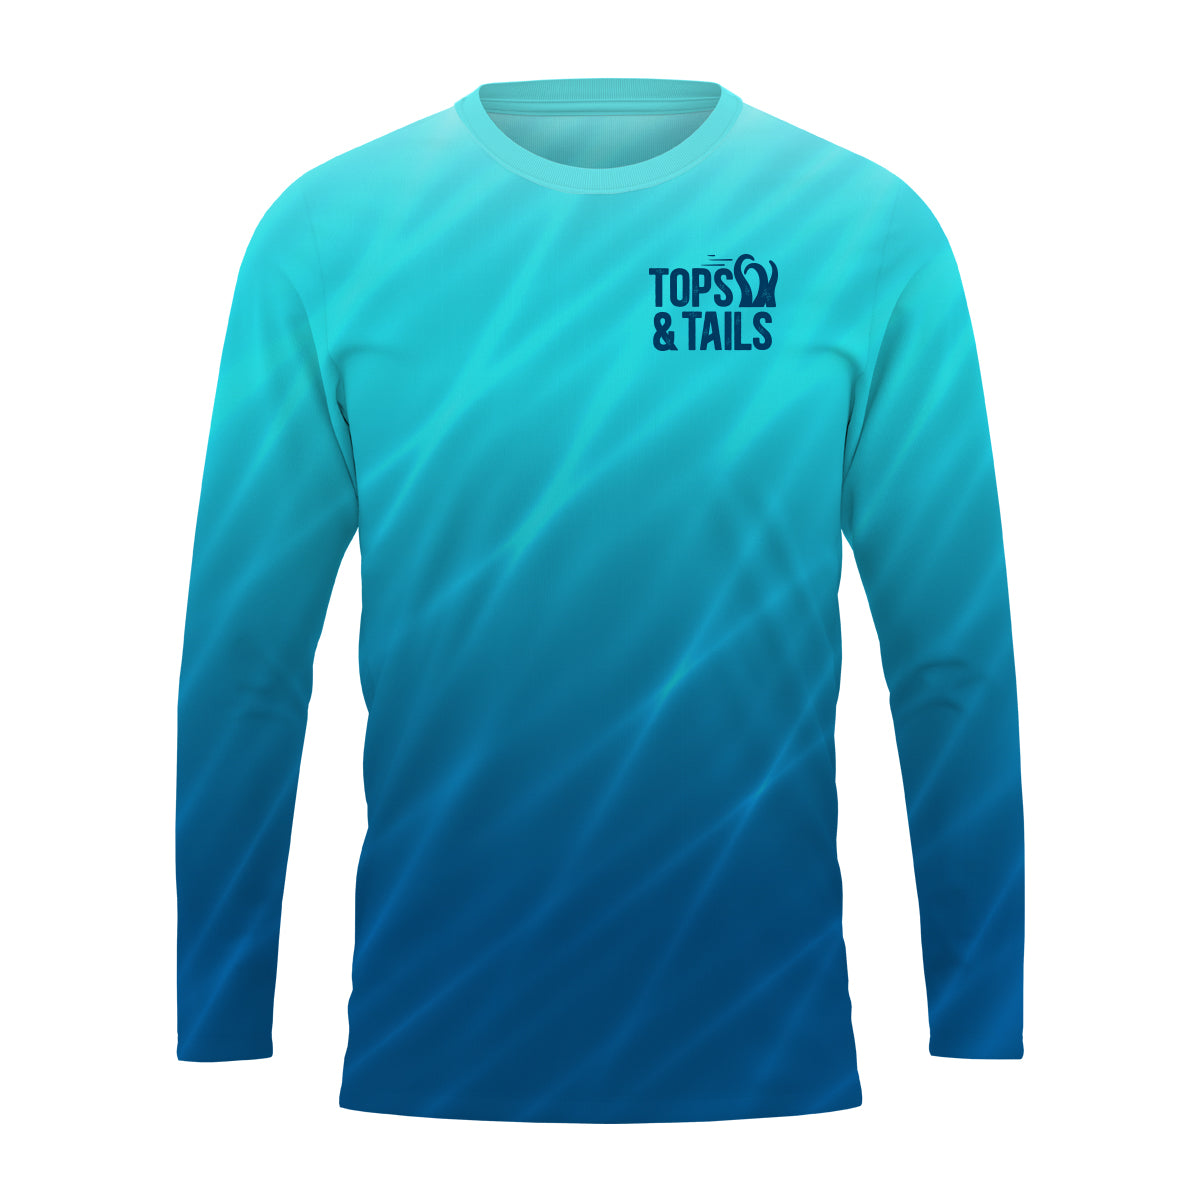 Octopus Long Sleeve UPF 50 Performance Shirt - Made in the USA